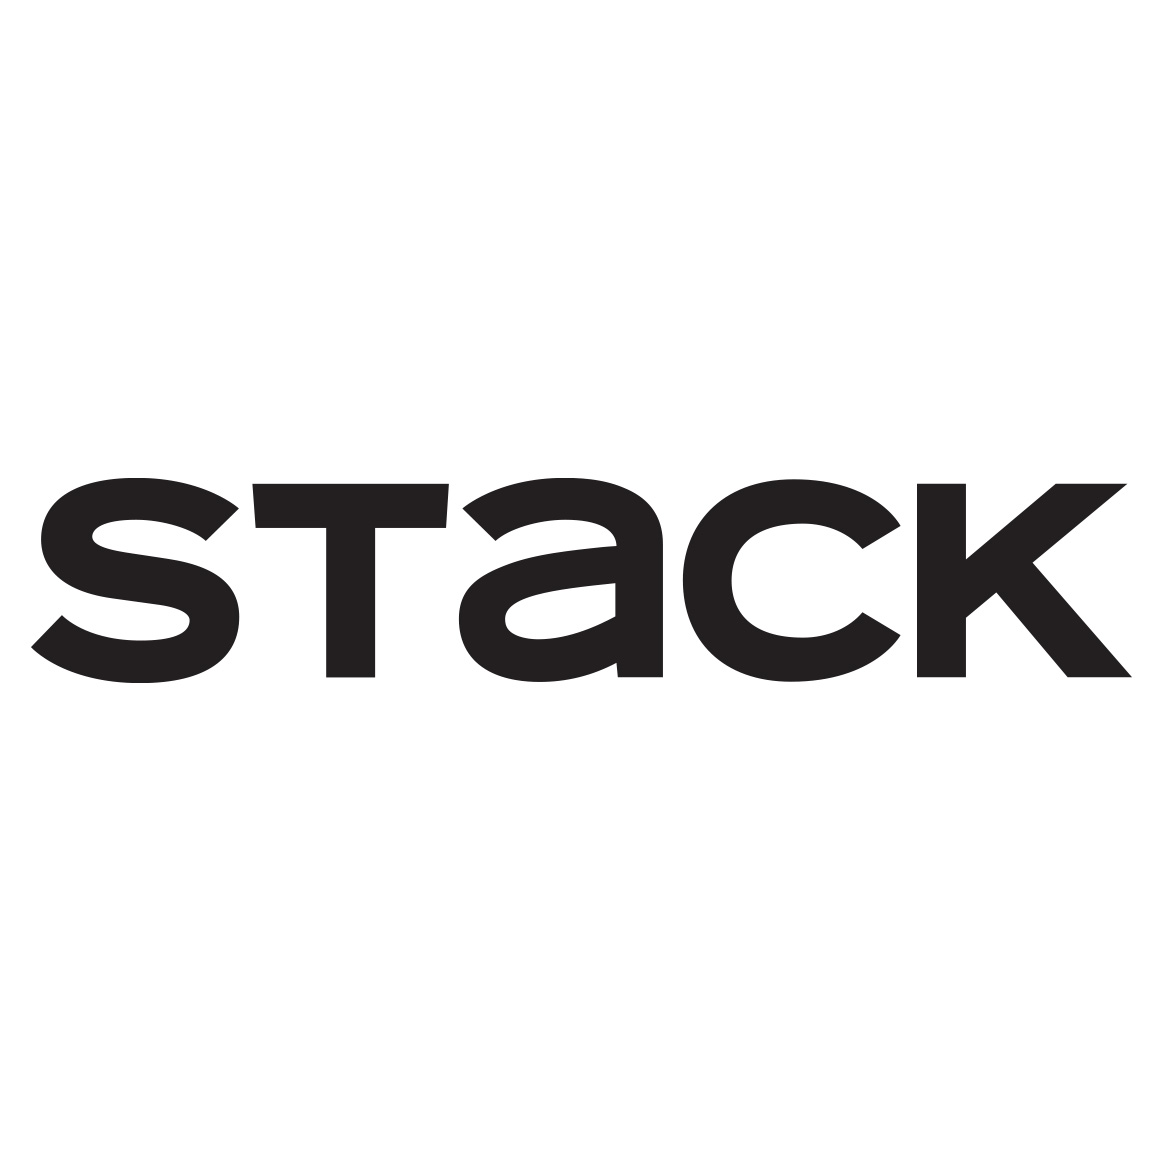 Stack logo design by logo designer Joshua Berman Design for your inspiration and for the worlds largest logo competition